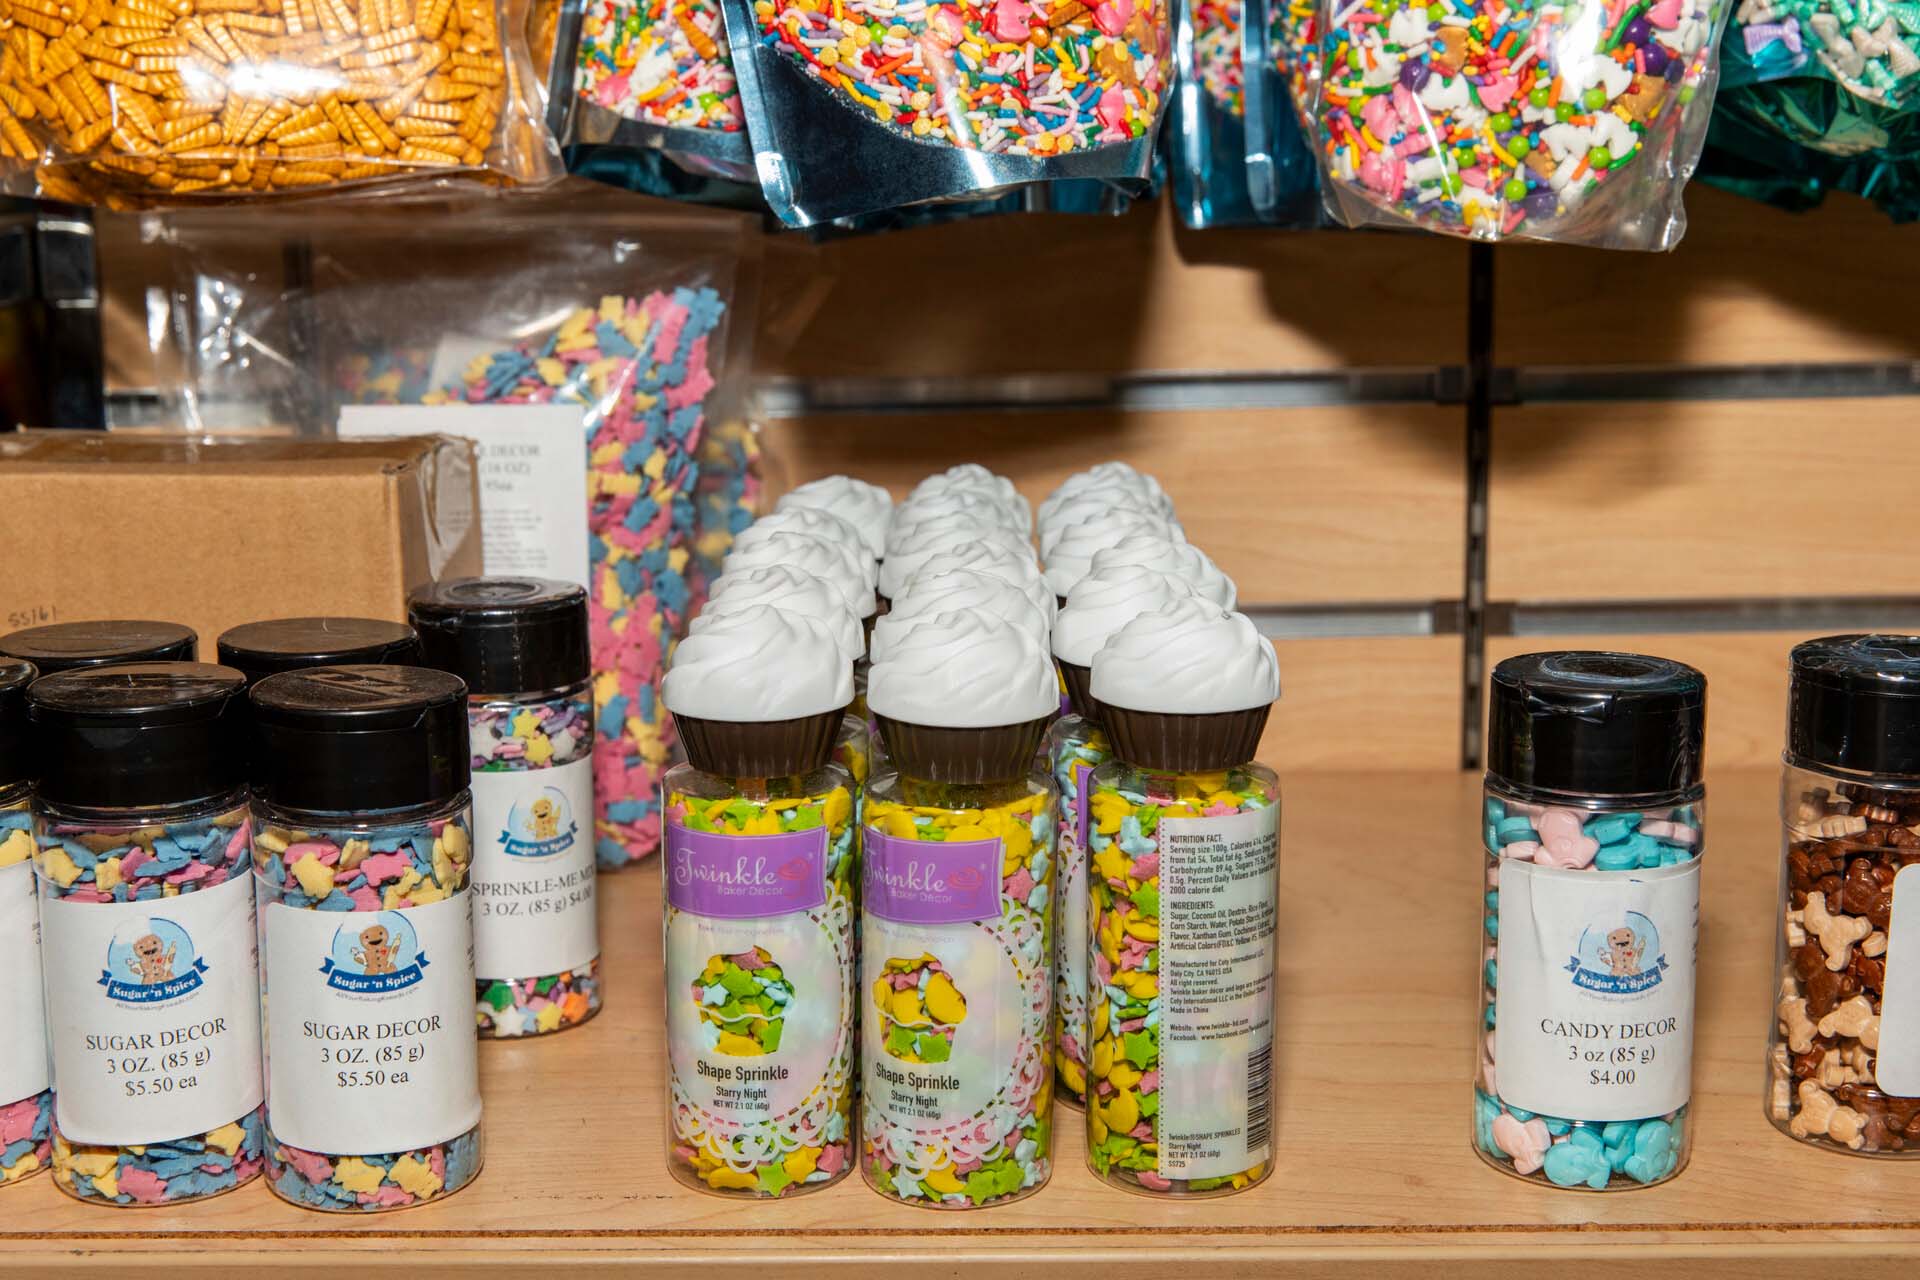 A shelf displaying a variety of colorful sprinkles in small jars and large plastic bags.